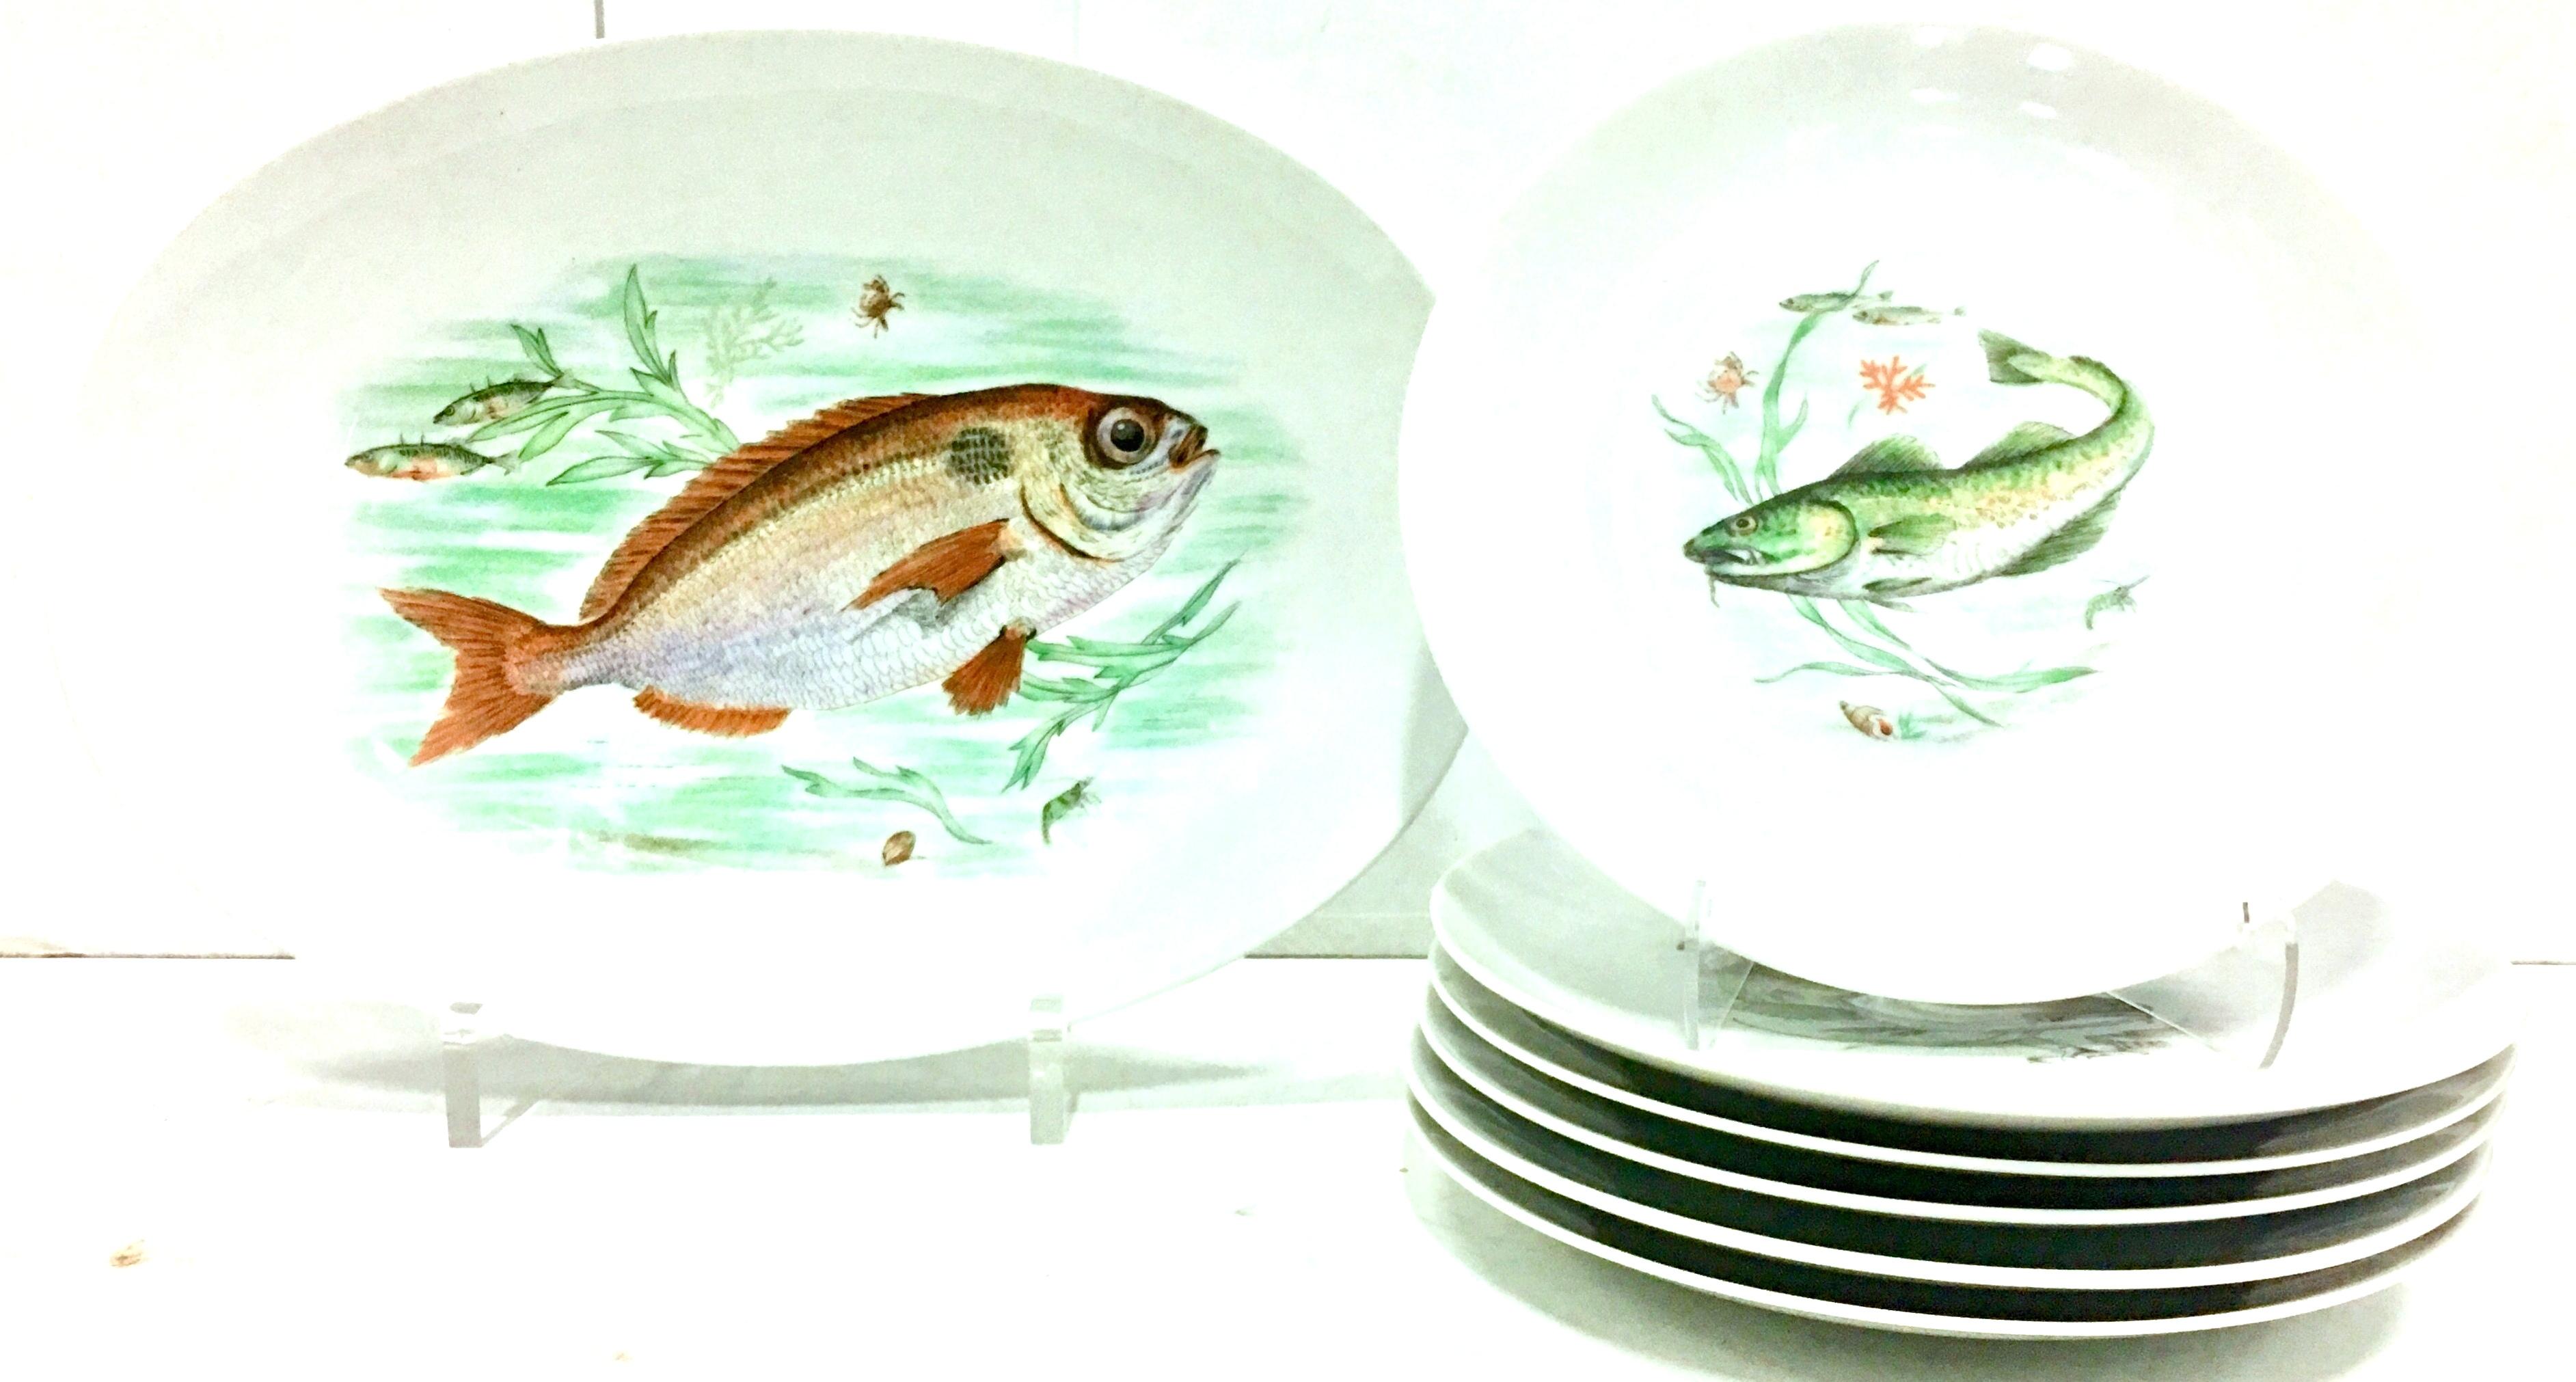 1930s German hand-painted porcelain fish service of seven pieces by, JKW. Set includes six dinner plates, each one a different fish motif and one large oval serving platter. Features a modern clean lined bright white ground with a vibrant earth tone